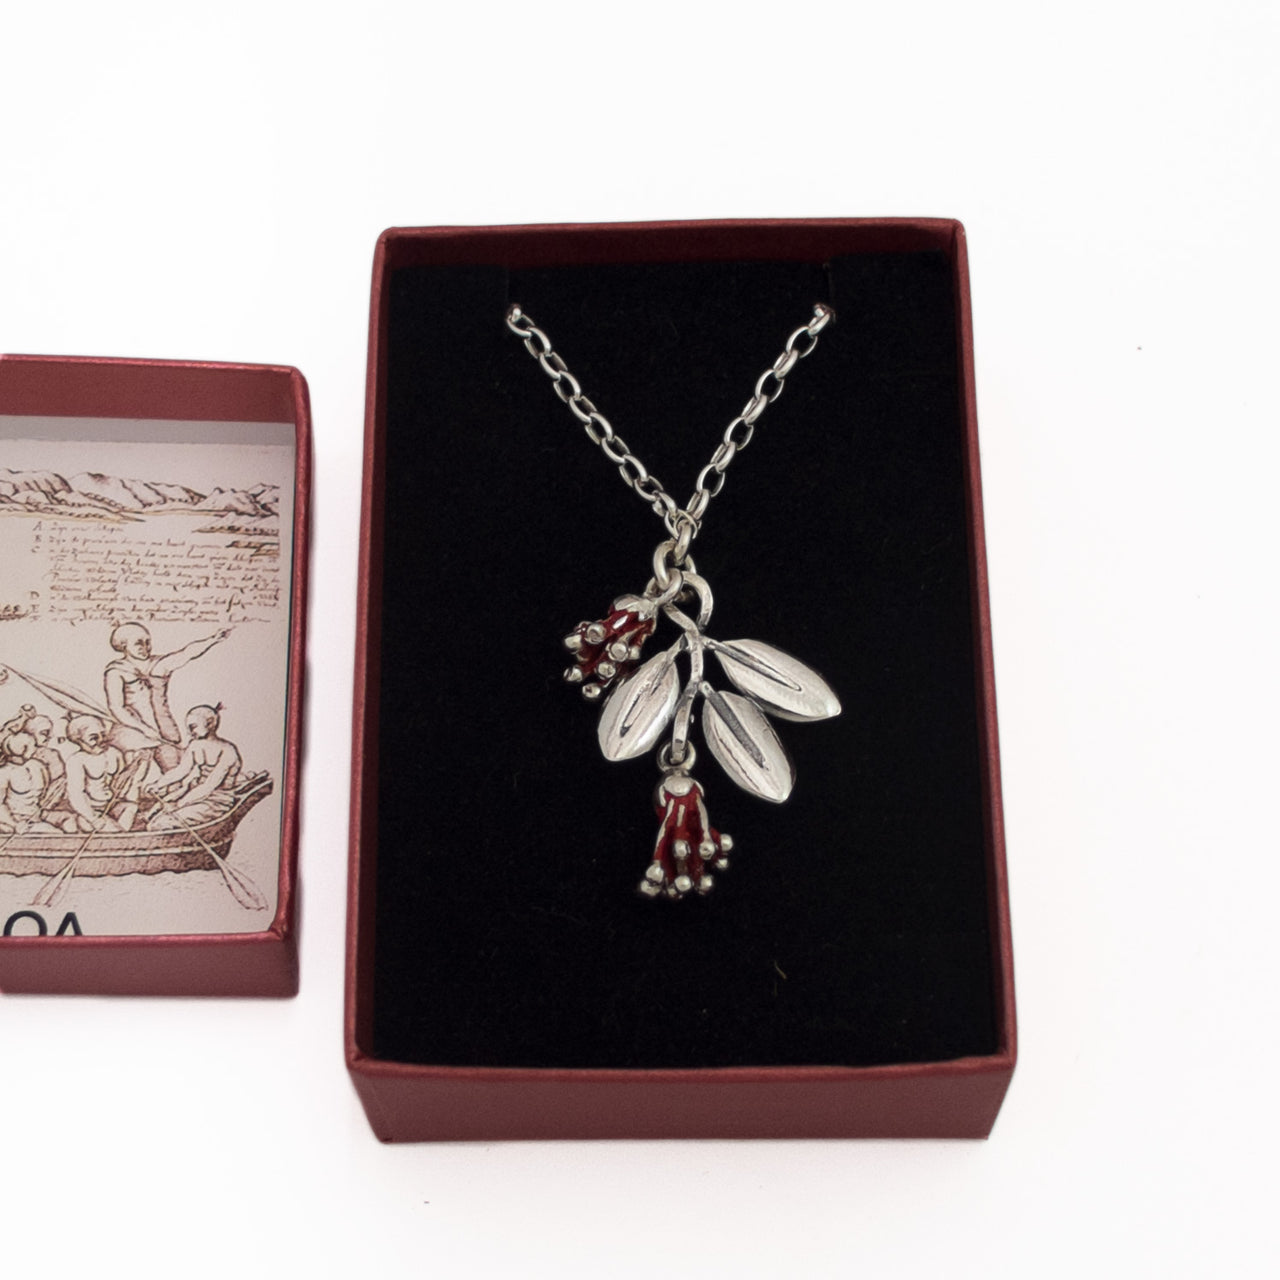 Pohutukawa Blossom and leaf  Sterling Silver Necklace in box by Martyn Milligan Rinopai Golden Bay